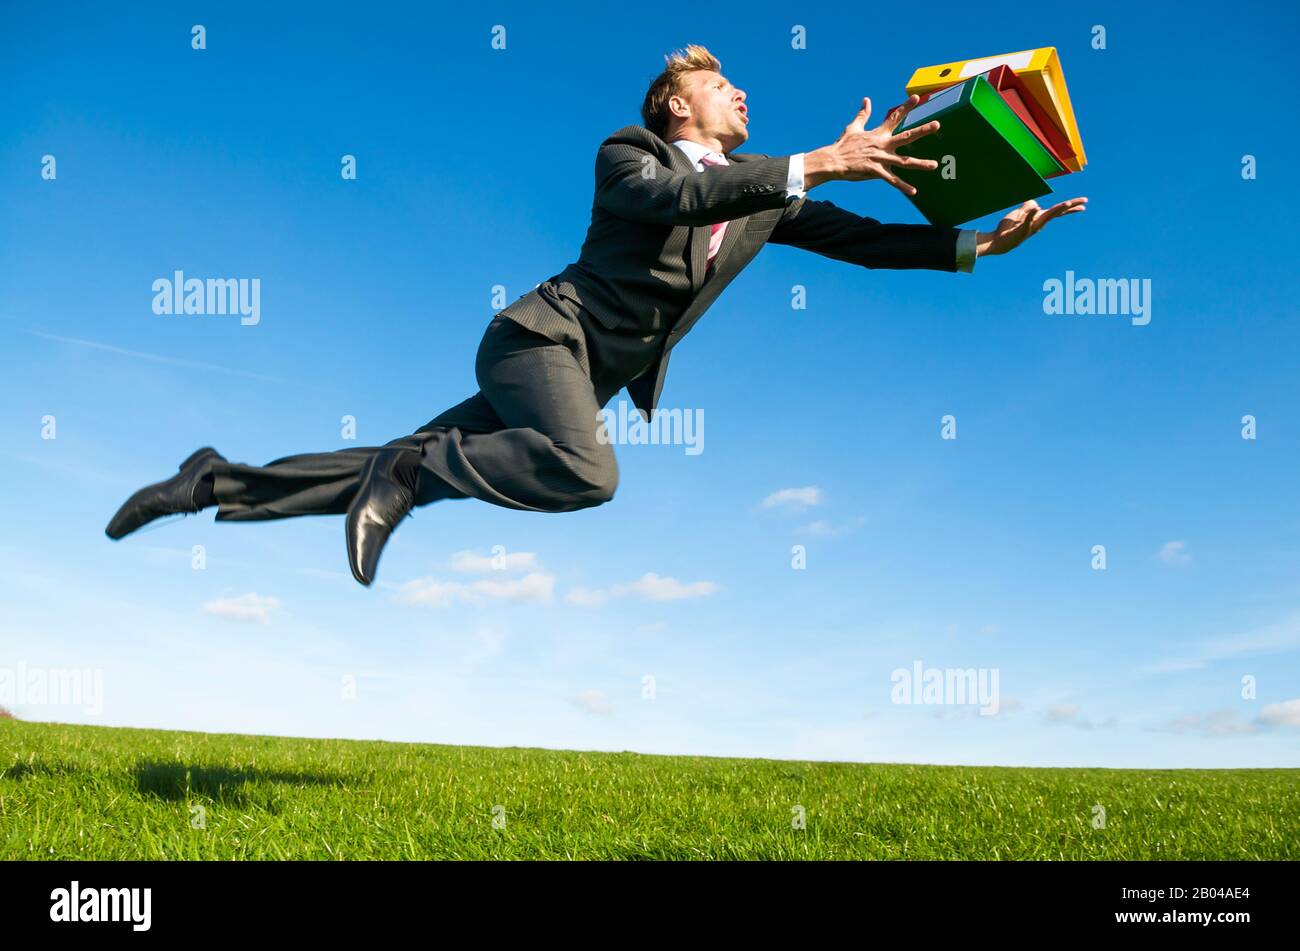 Careless office worker tripping dramatically with his file folders flying outdoors in a green grass field Stock Photo